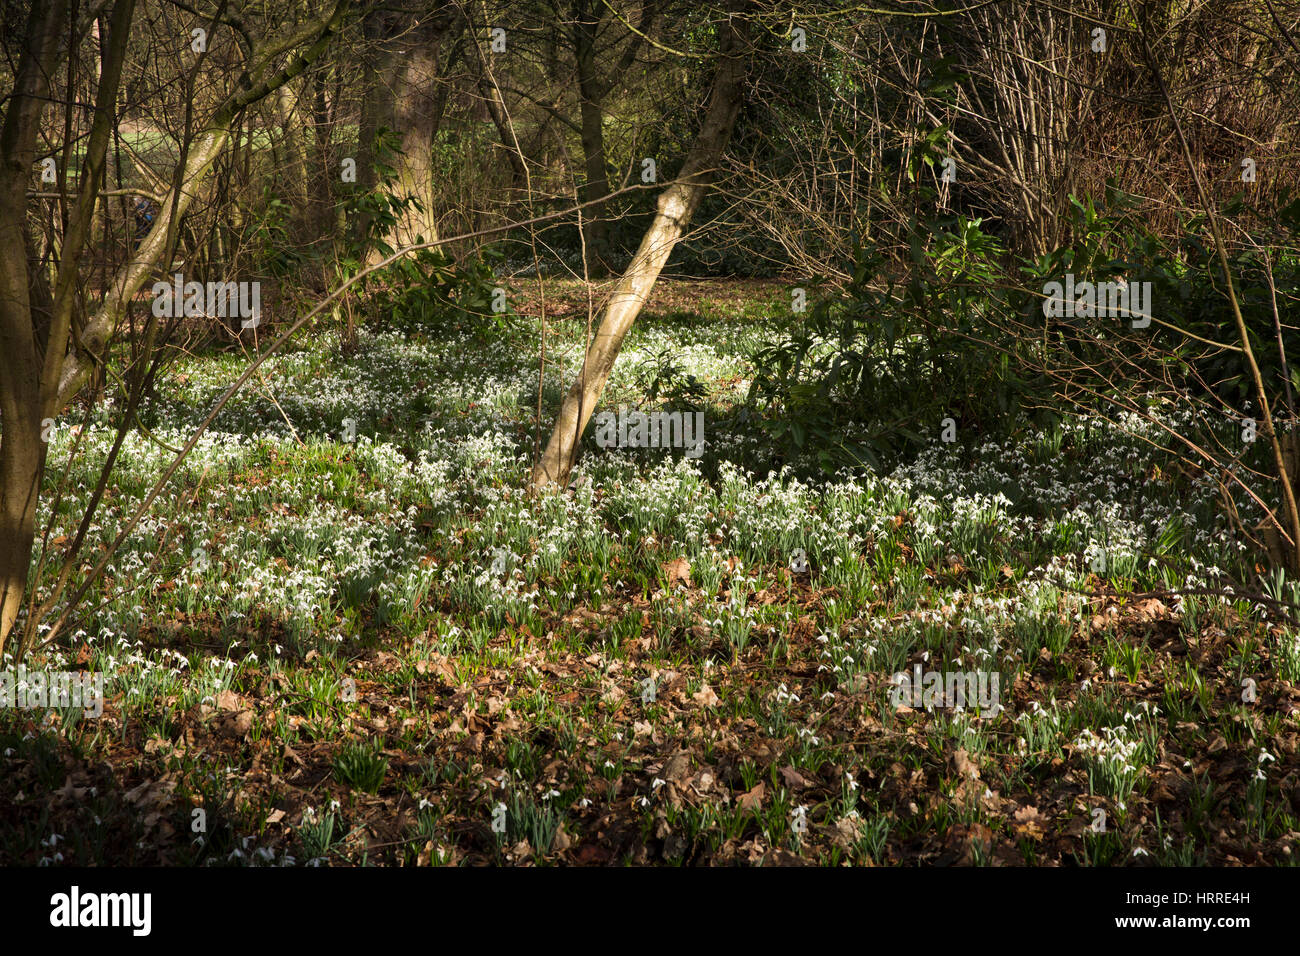 UK, England, Cheshire, Scholar Green, Rode Hall, Gardens, Old Wood, snowdrops amongst trees in late February Stock Photo